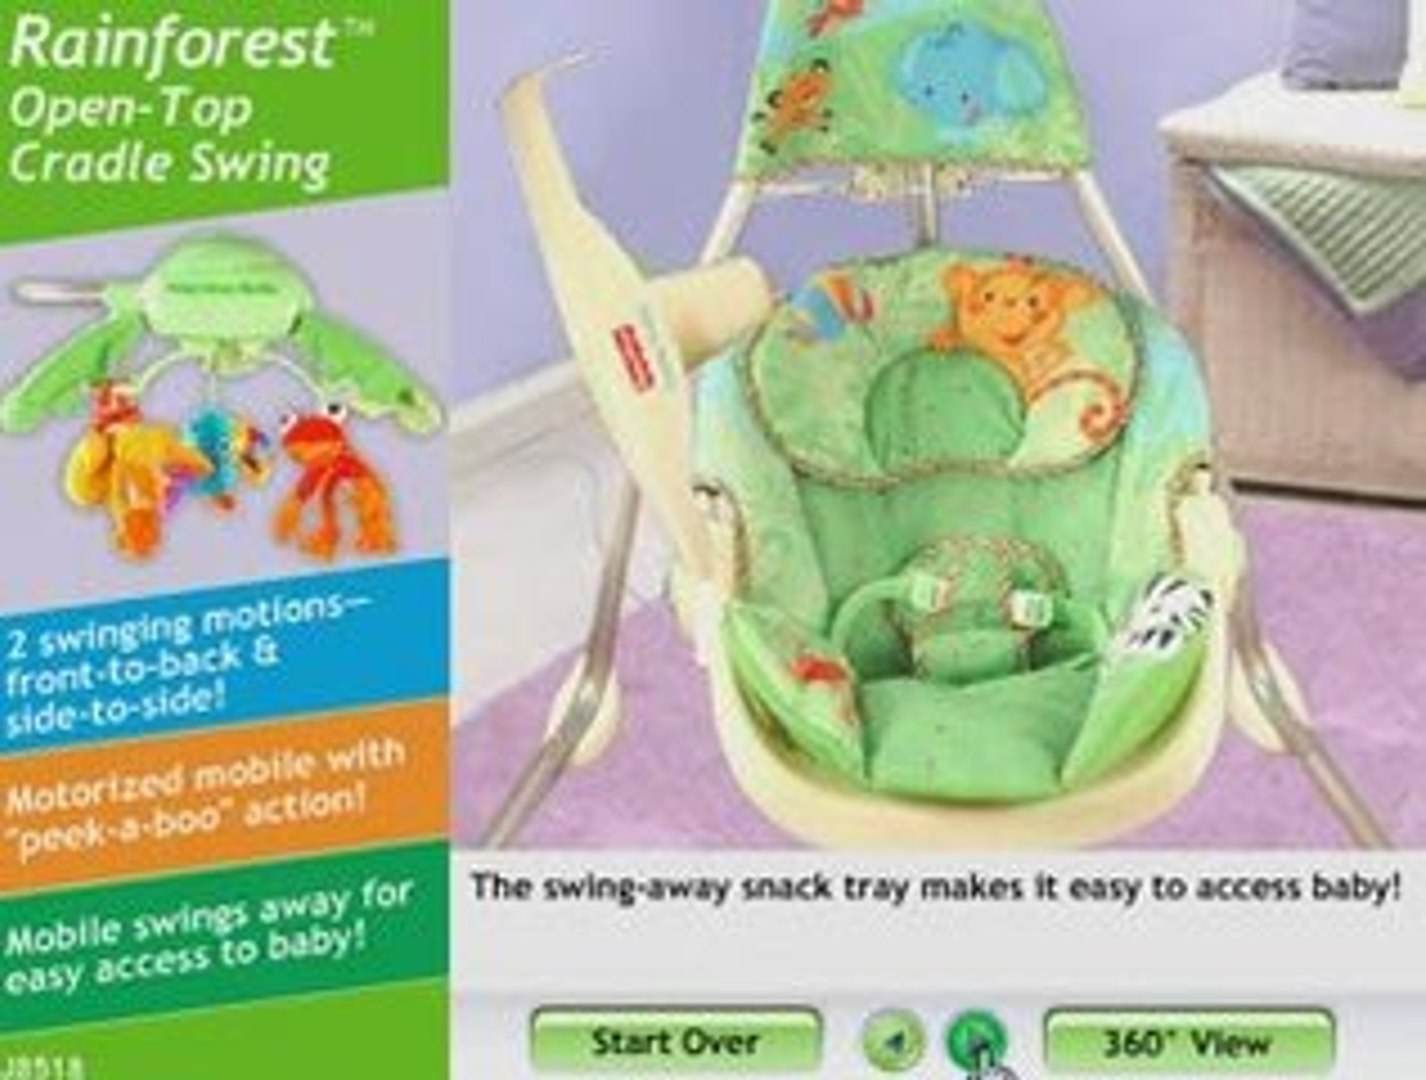 fisher price rainforest open top cradle swing - video Dailymotion